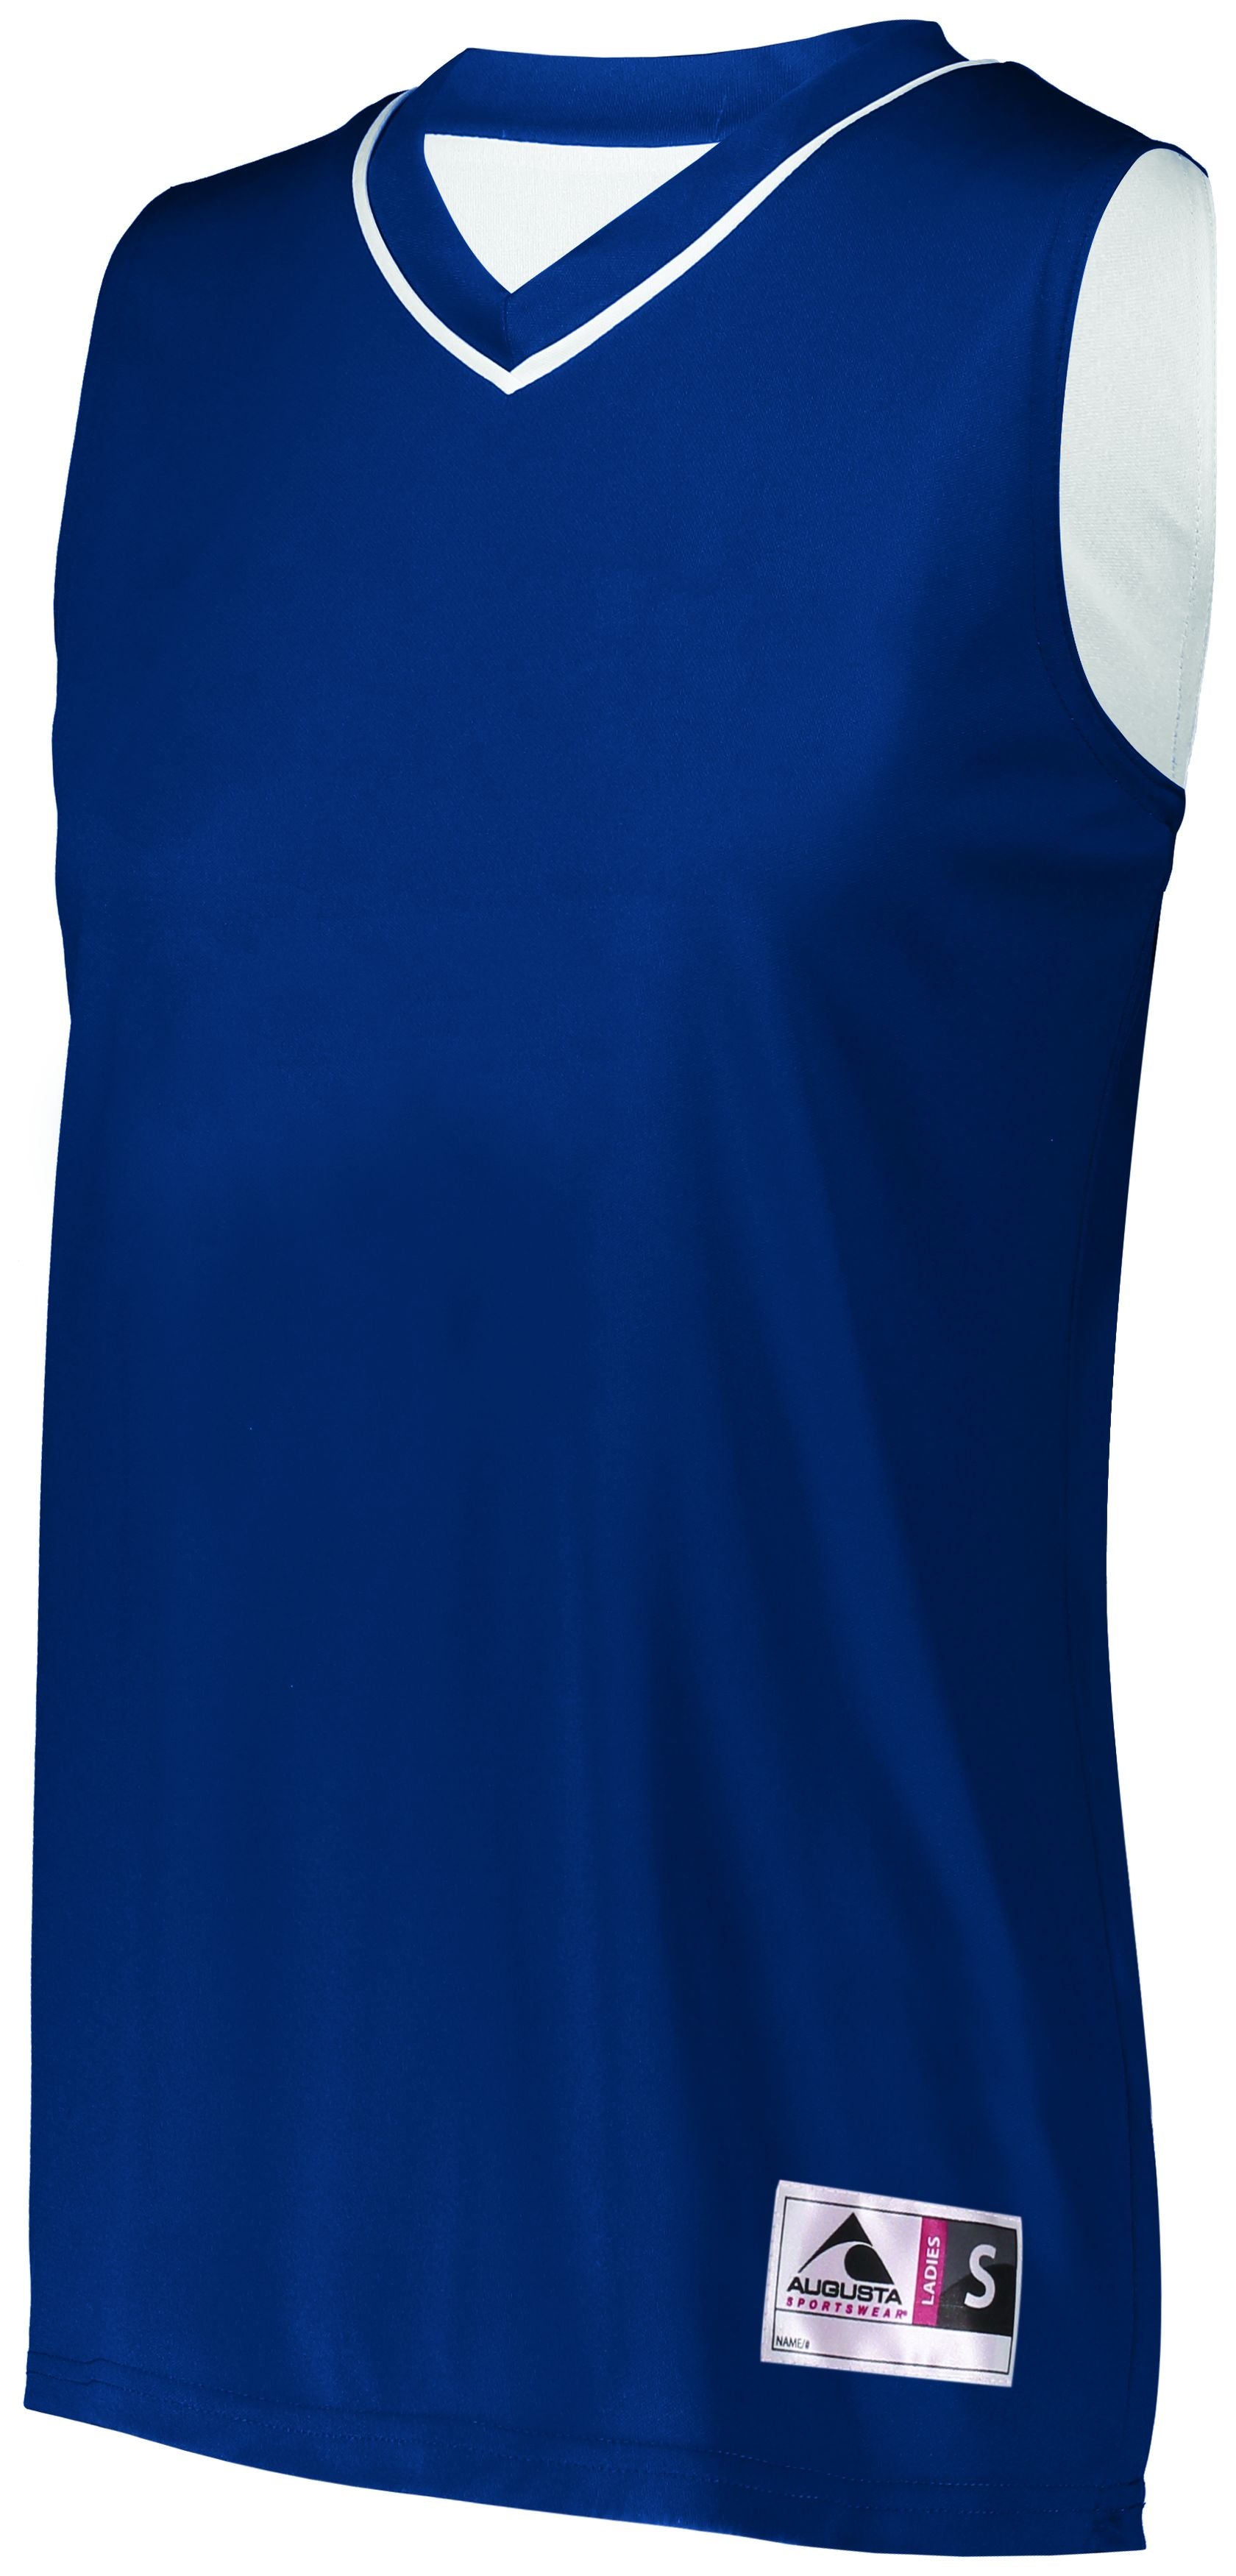 Augusta Sportswear Ladies Reversible Two-Color Jersey in Navy/White  -Part of the Ladies, Ladies-Jersey, Augusta-Products, Basketball, Shirts, All-Sports, All-Sports-1 product lines at KanaleyCreations.com